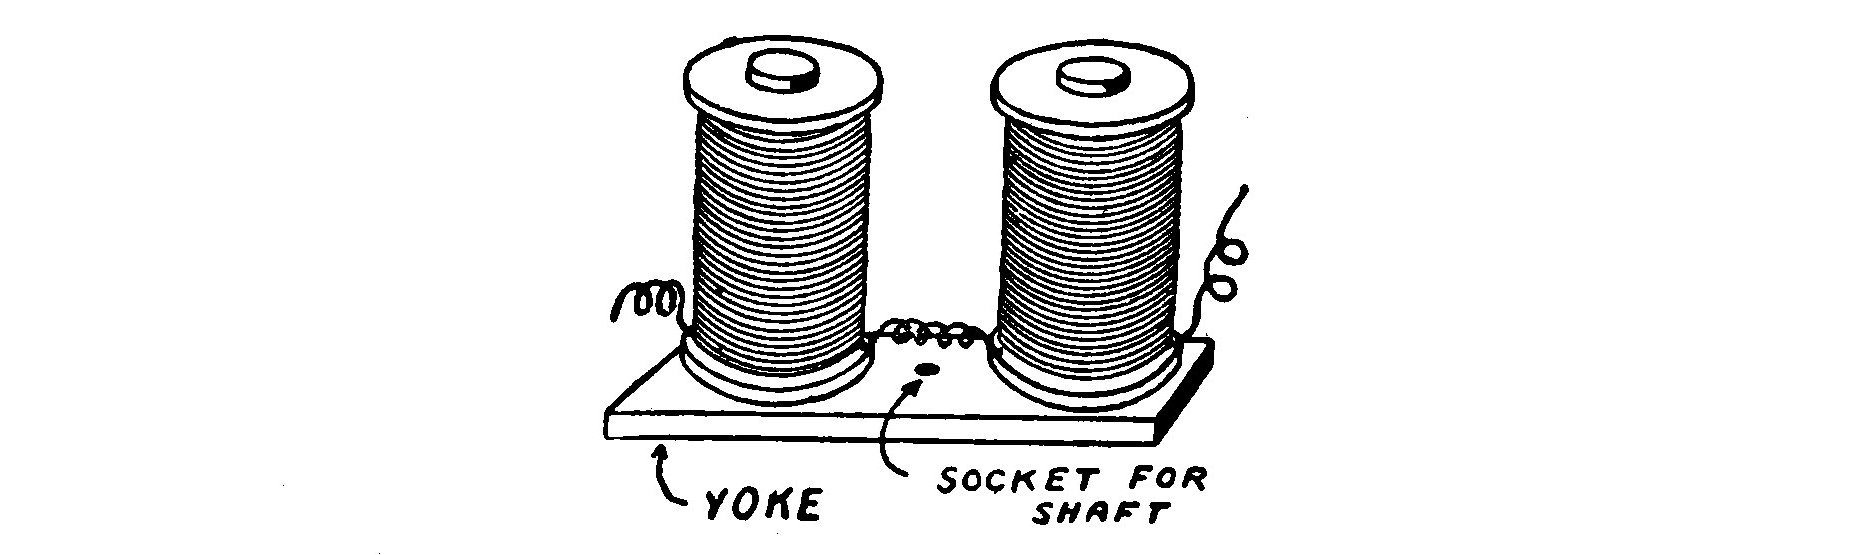 FIG. 34.—The completed Electromagnets mounted on the Yoke.